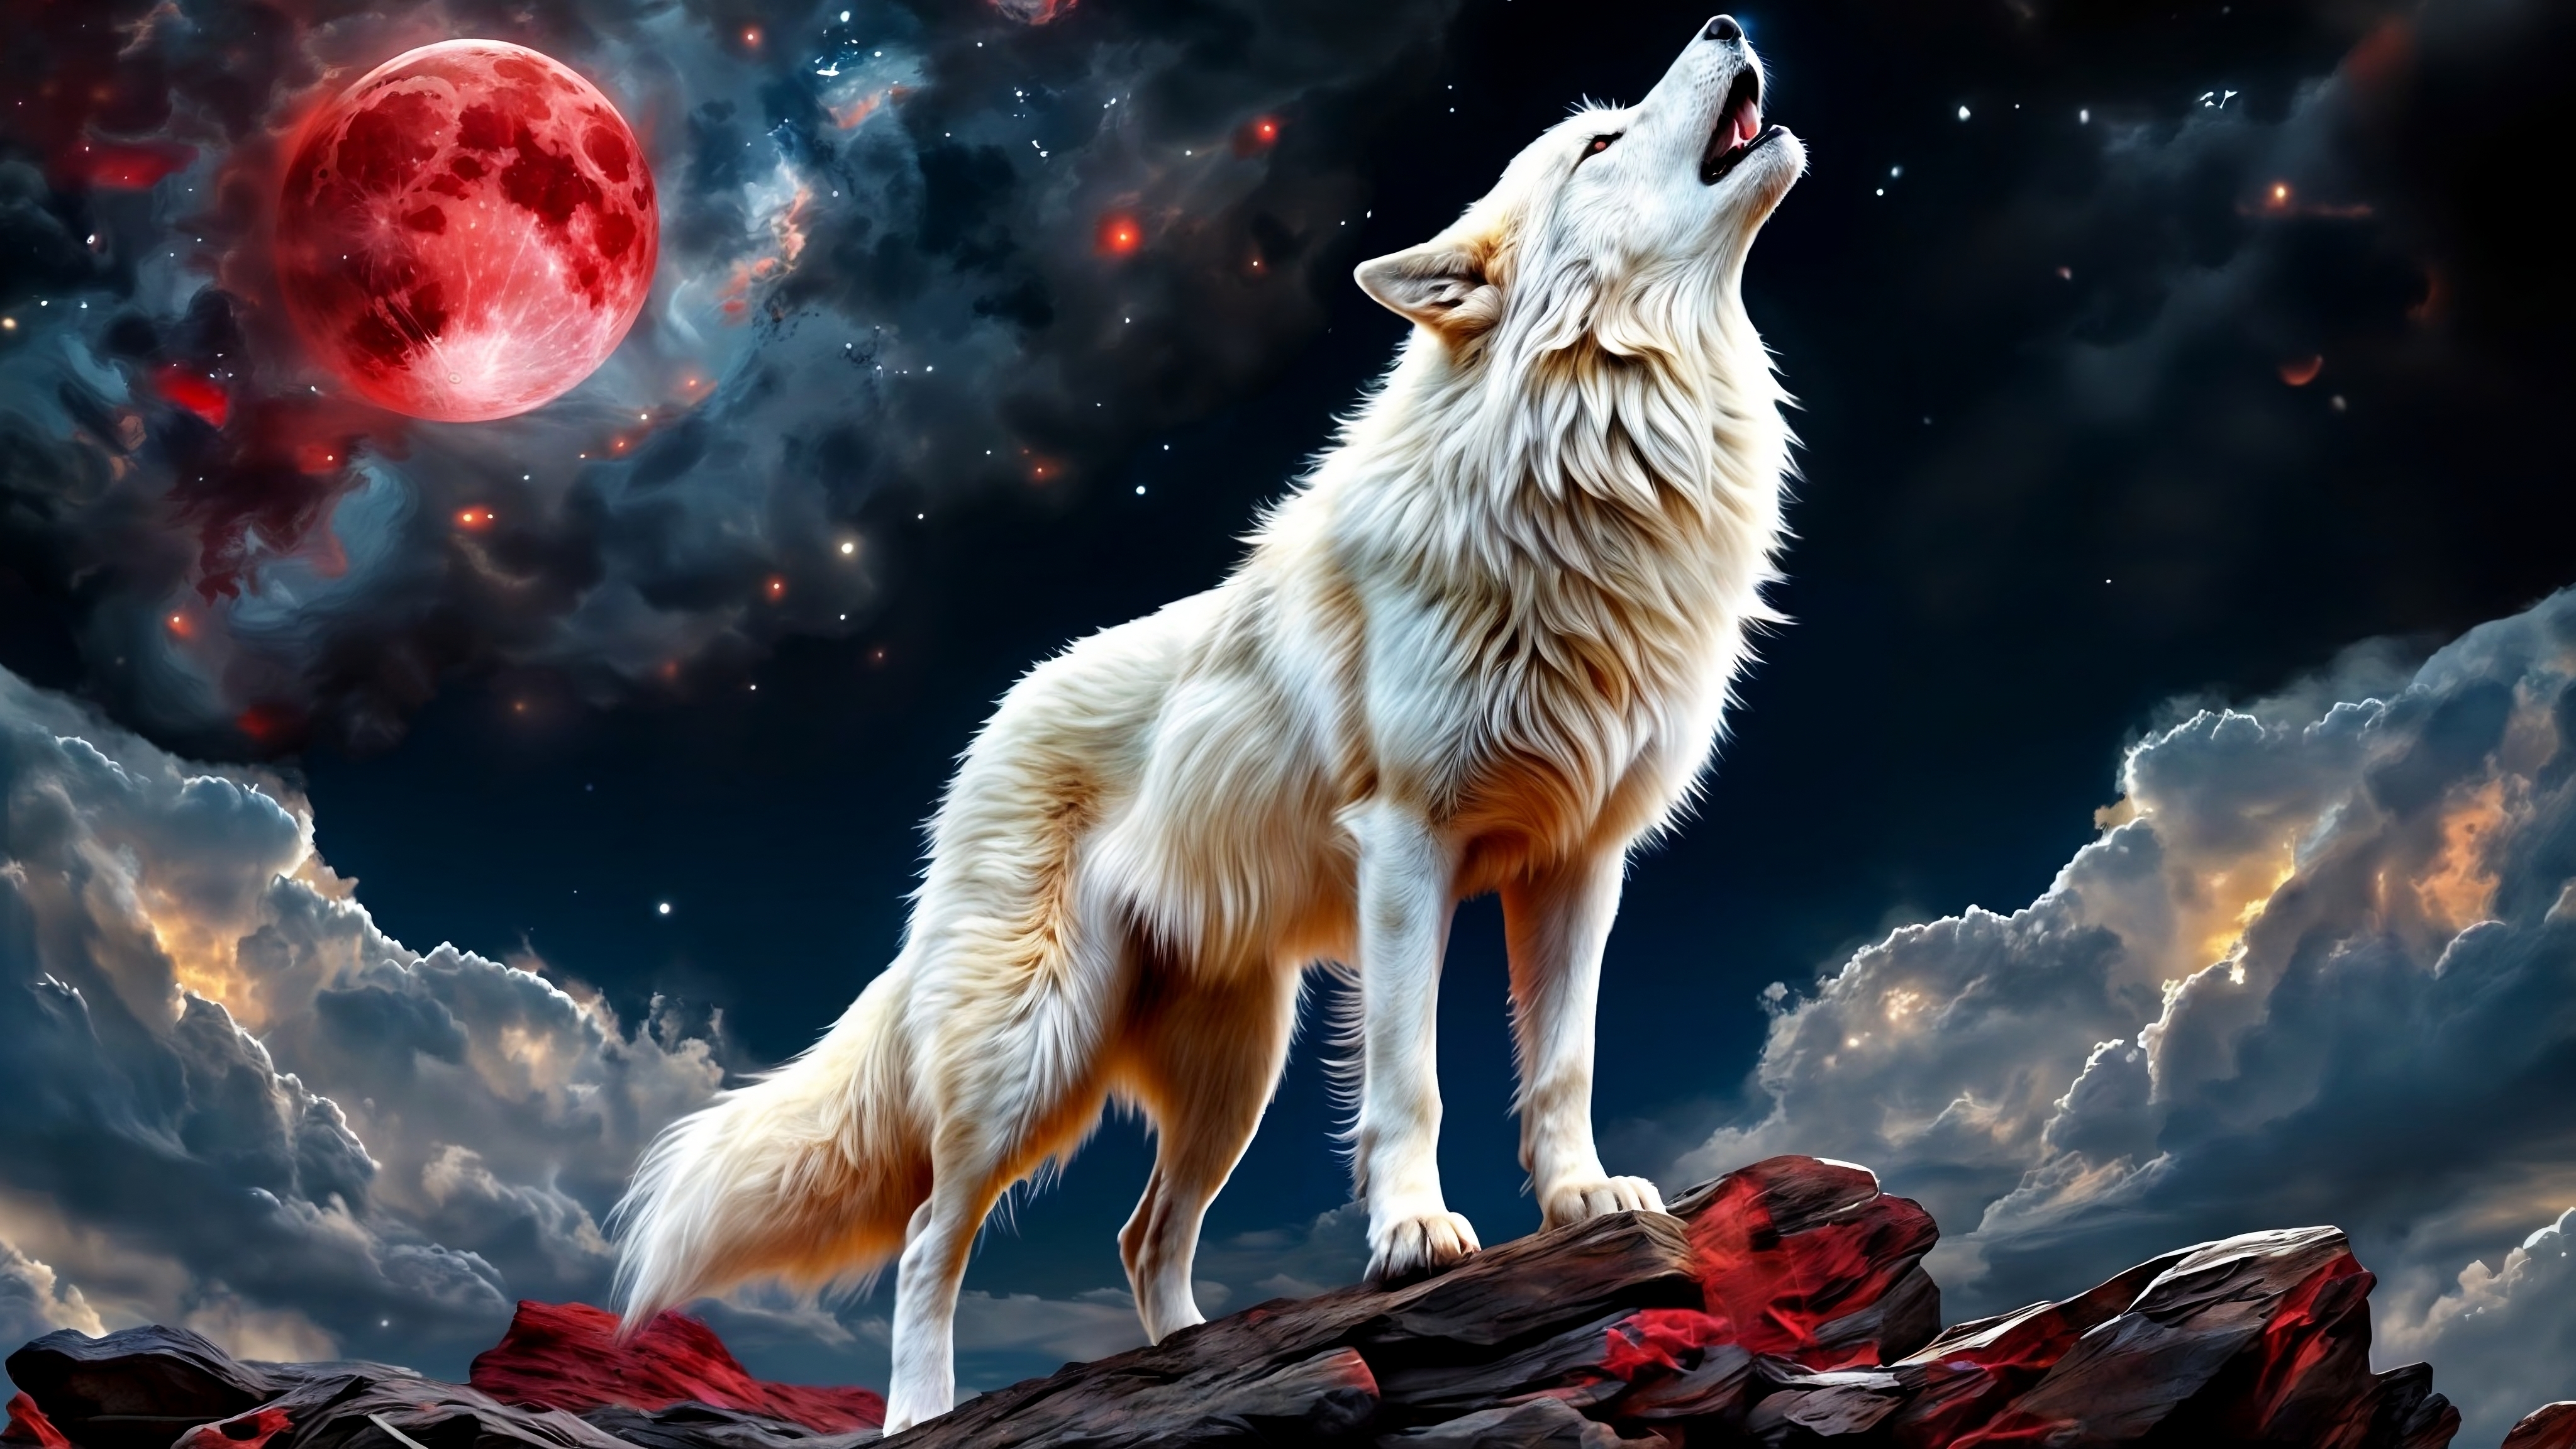 The white wolf on the hilltop howls at the moon